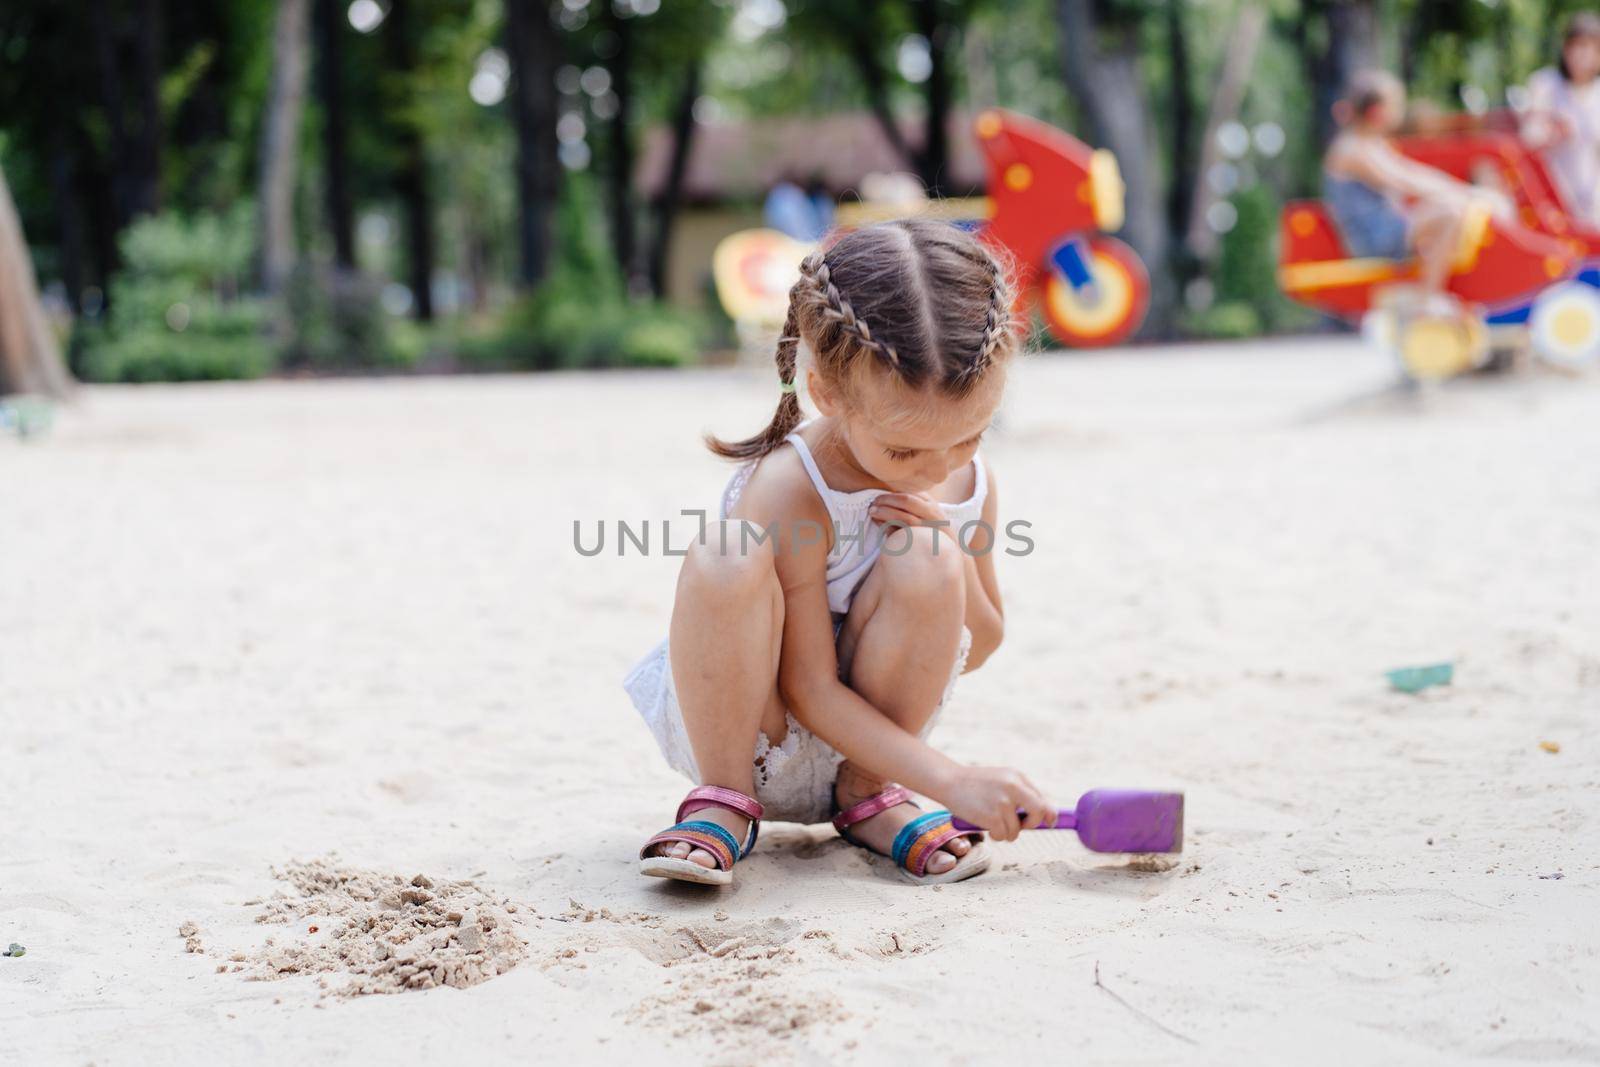 Little Girl Playing Sandbox Playground Digging Sand Shovel Building Sand Figure Summer Day. Caucasian Female Child 5 years Have Fun Outdoor